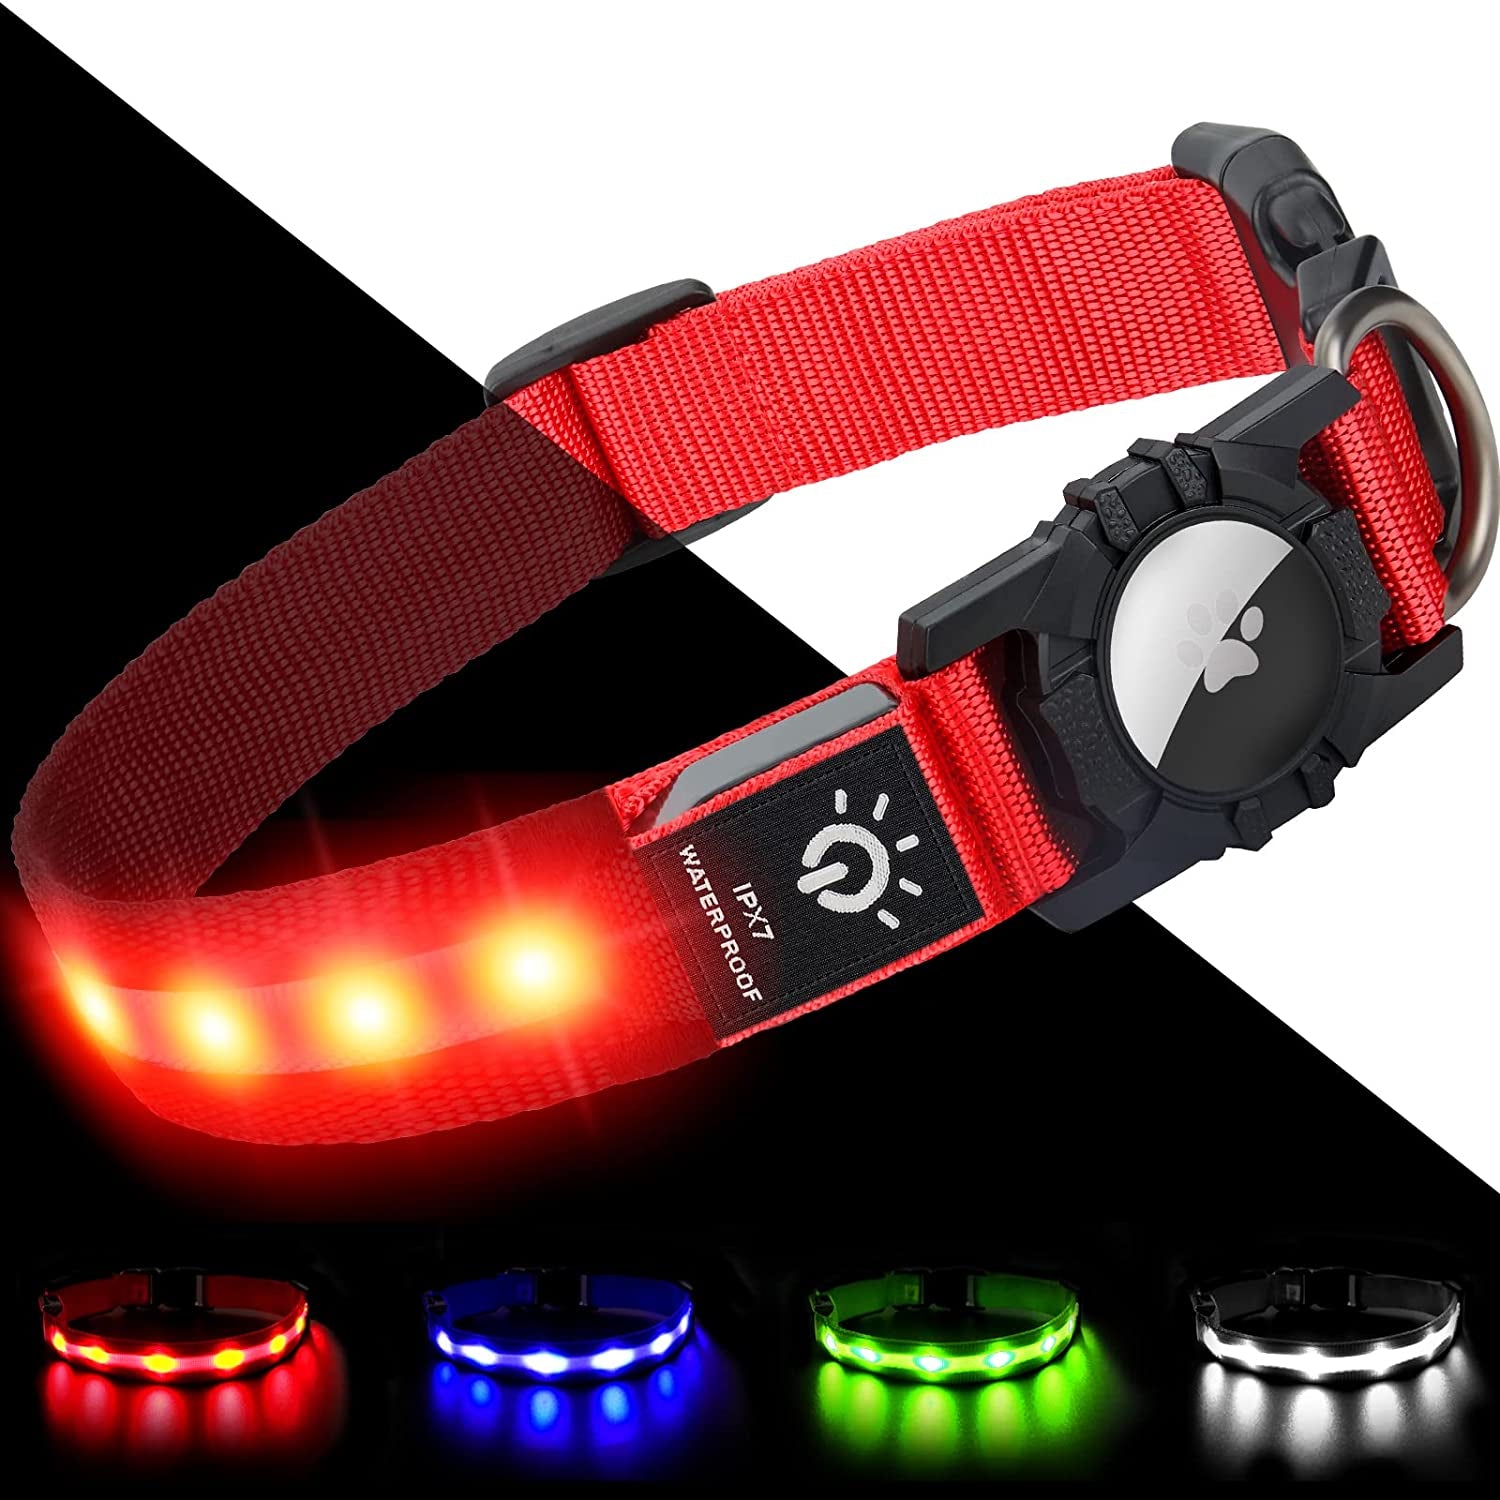 Joytale LED Airtag Dog Collar[100% IPX7 Waterproof], Light up Night Safety Pet Collars for Air Tag, USB C Rechargeable Lighted Glow Nylon Collar with Airtag Holder Case for Small Medium Large Dogs